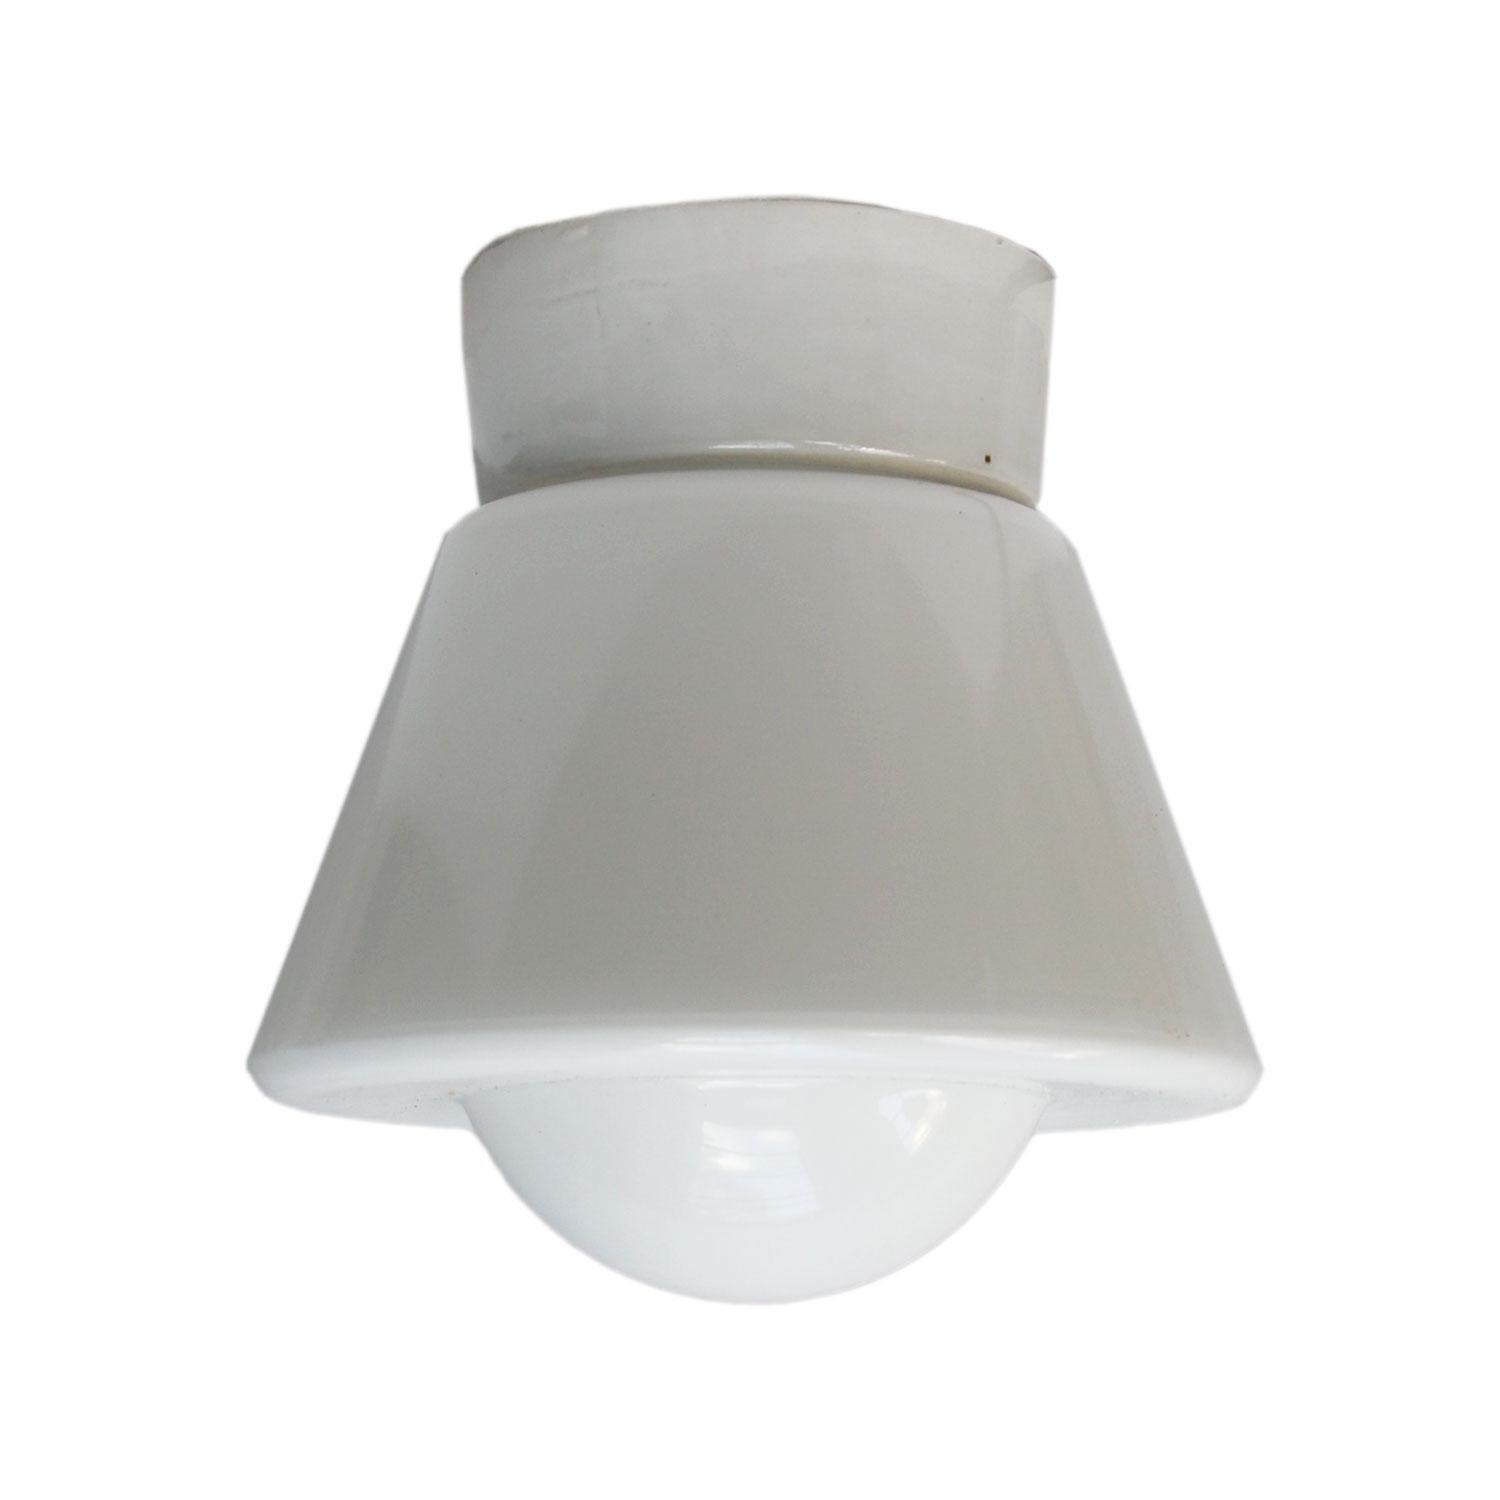 Industrial ceiling lamp.
White porcelain, white opaline glass.

2 conductors, no ground.
Measures: Diameter foot 10 cm
Suitable for 110 volt USA
new wiring is CE certified (220 volt)  or UL Listed (110 volt) 

Weight: 1.1 kg / 2.4 lb

Priced per